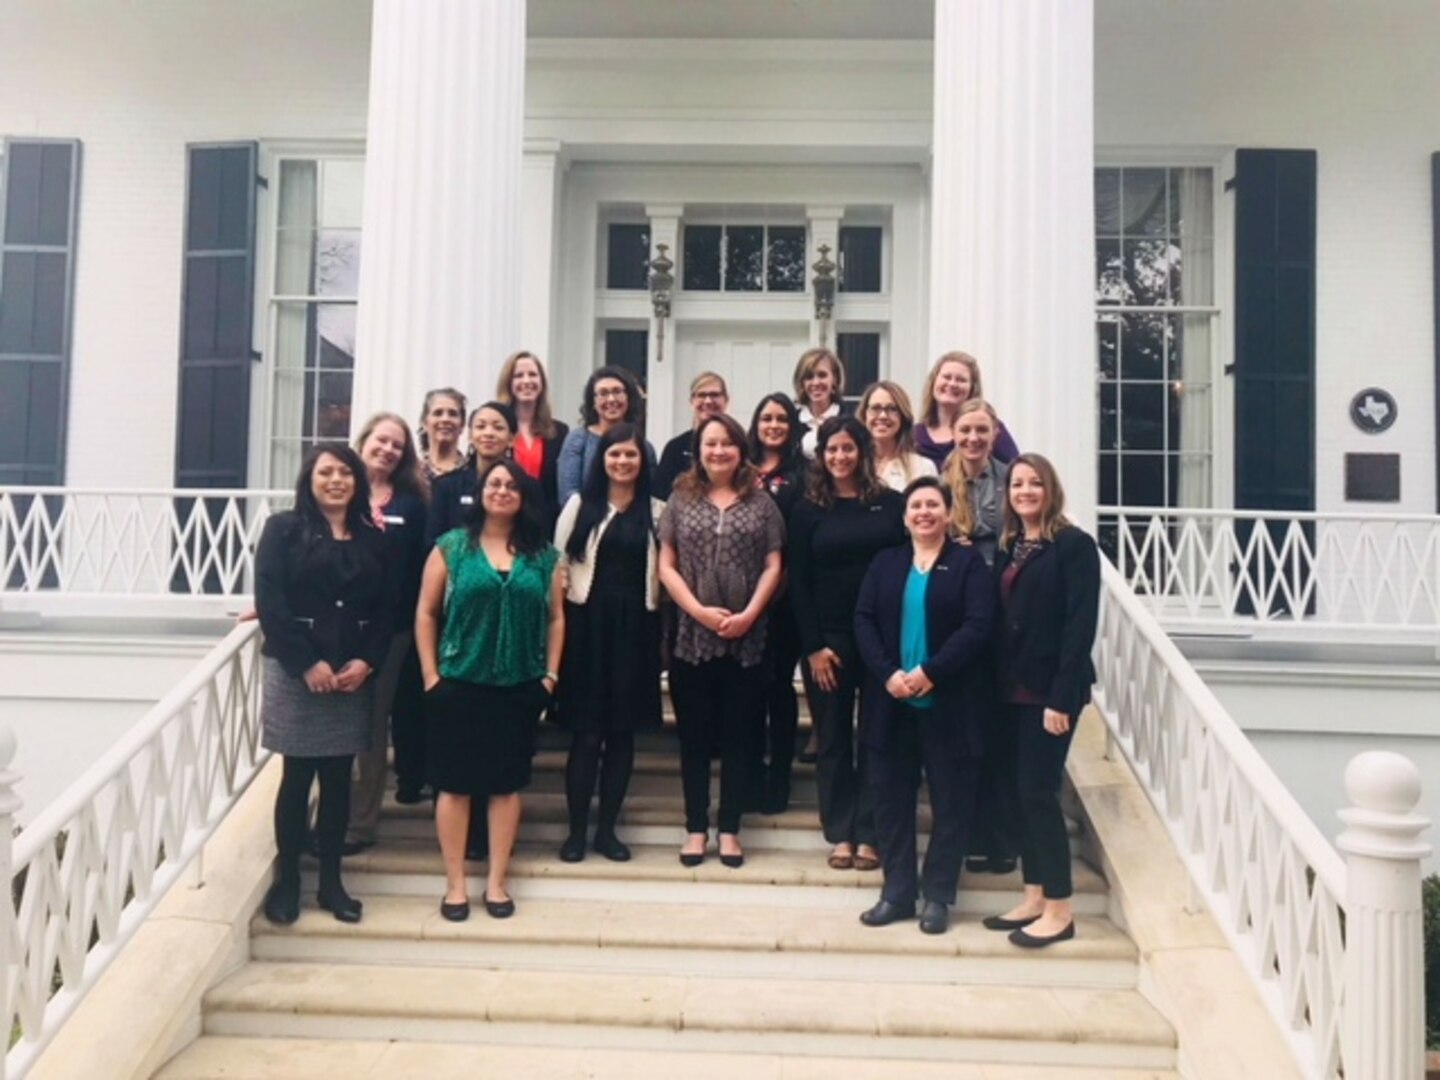 Volunteers from the Key Spouse Program stand in front of the Governor's mansion in Austin, Texas after meeting with the First Lady of Texas Cecilia Abbott (pictured center) January 2018.  The group informed Mrs. Abbott about the assistance volunteers provide for newly arrived Air Force families at Joint Base San Antonio.